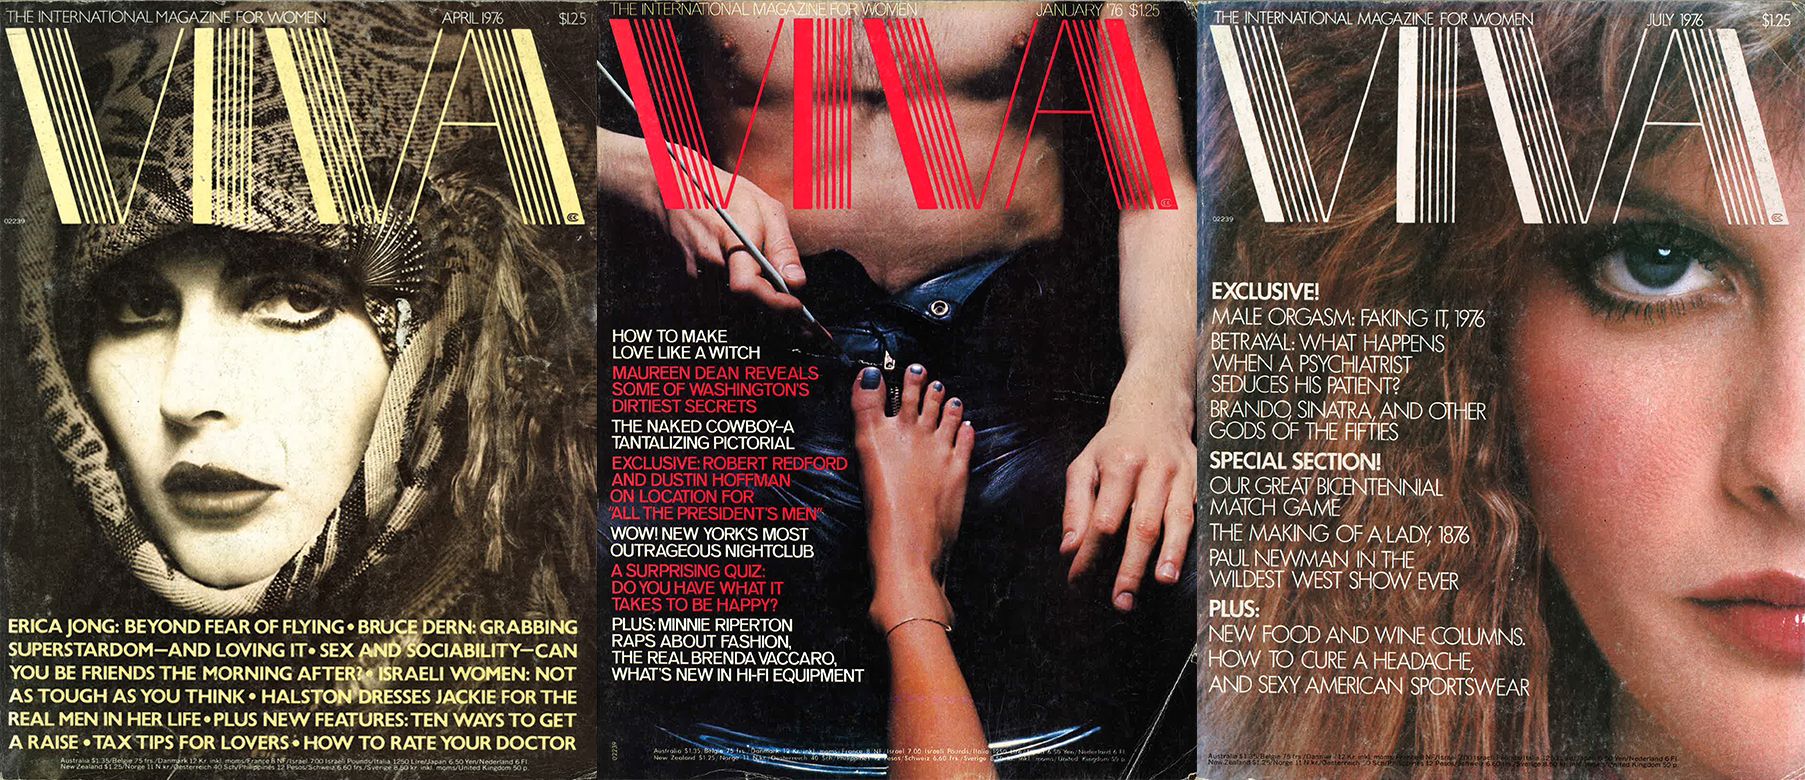 John Persons Porn Magazines - An Oral History of Viva, the '70s Porn Magazine for Women